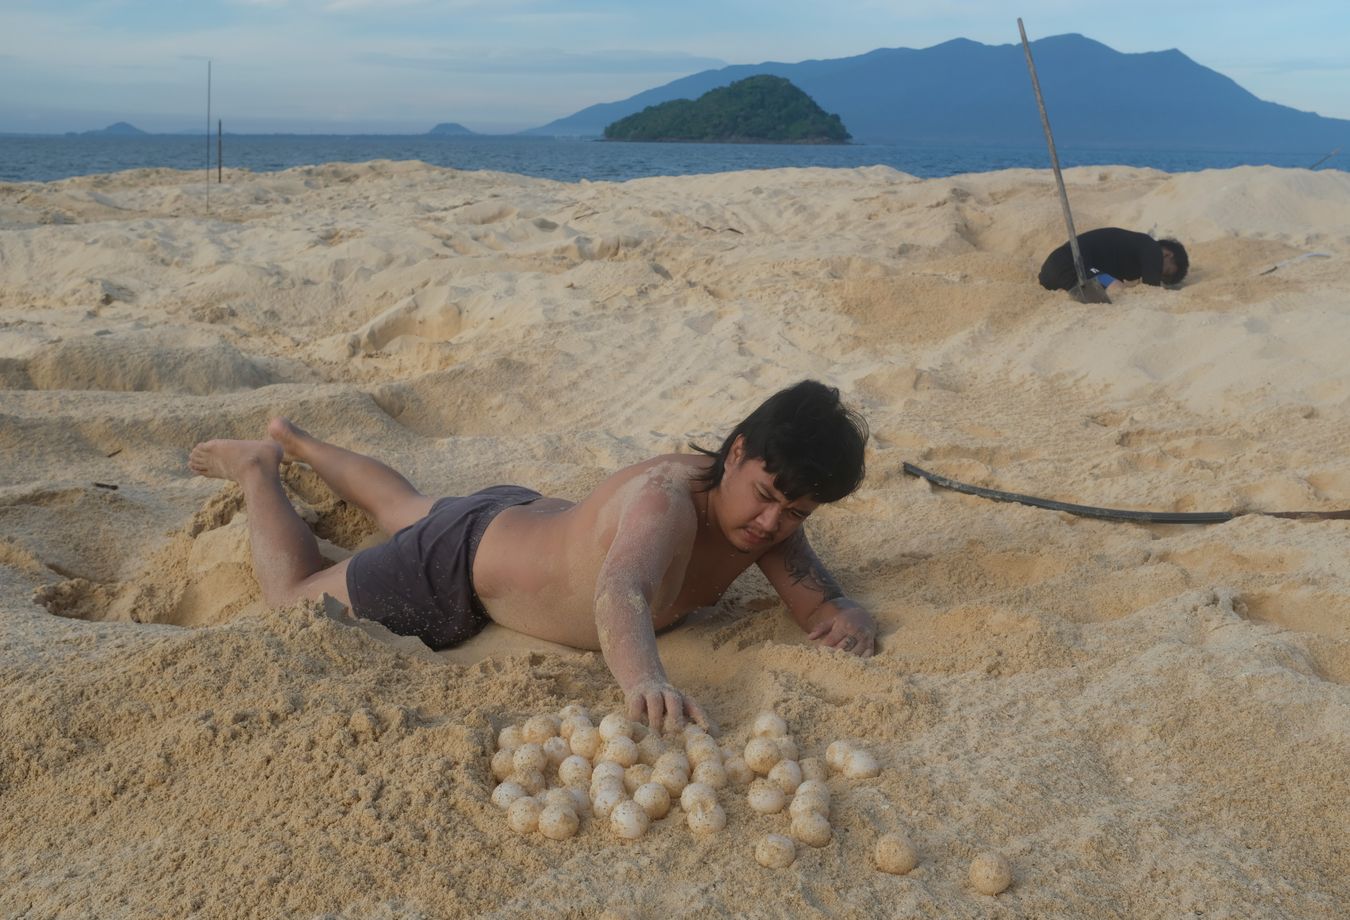 Early morning ranger Chris removes sea turtle eggs from their nest, Pueh Mountain in the background.